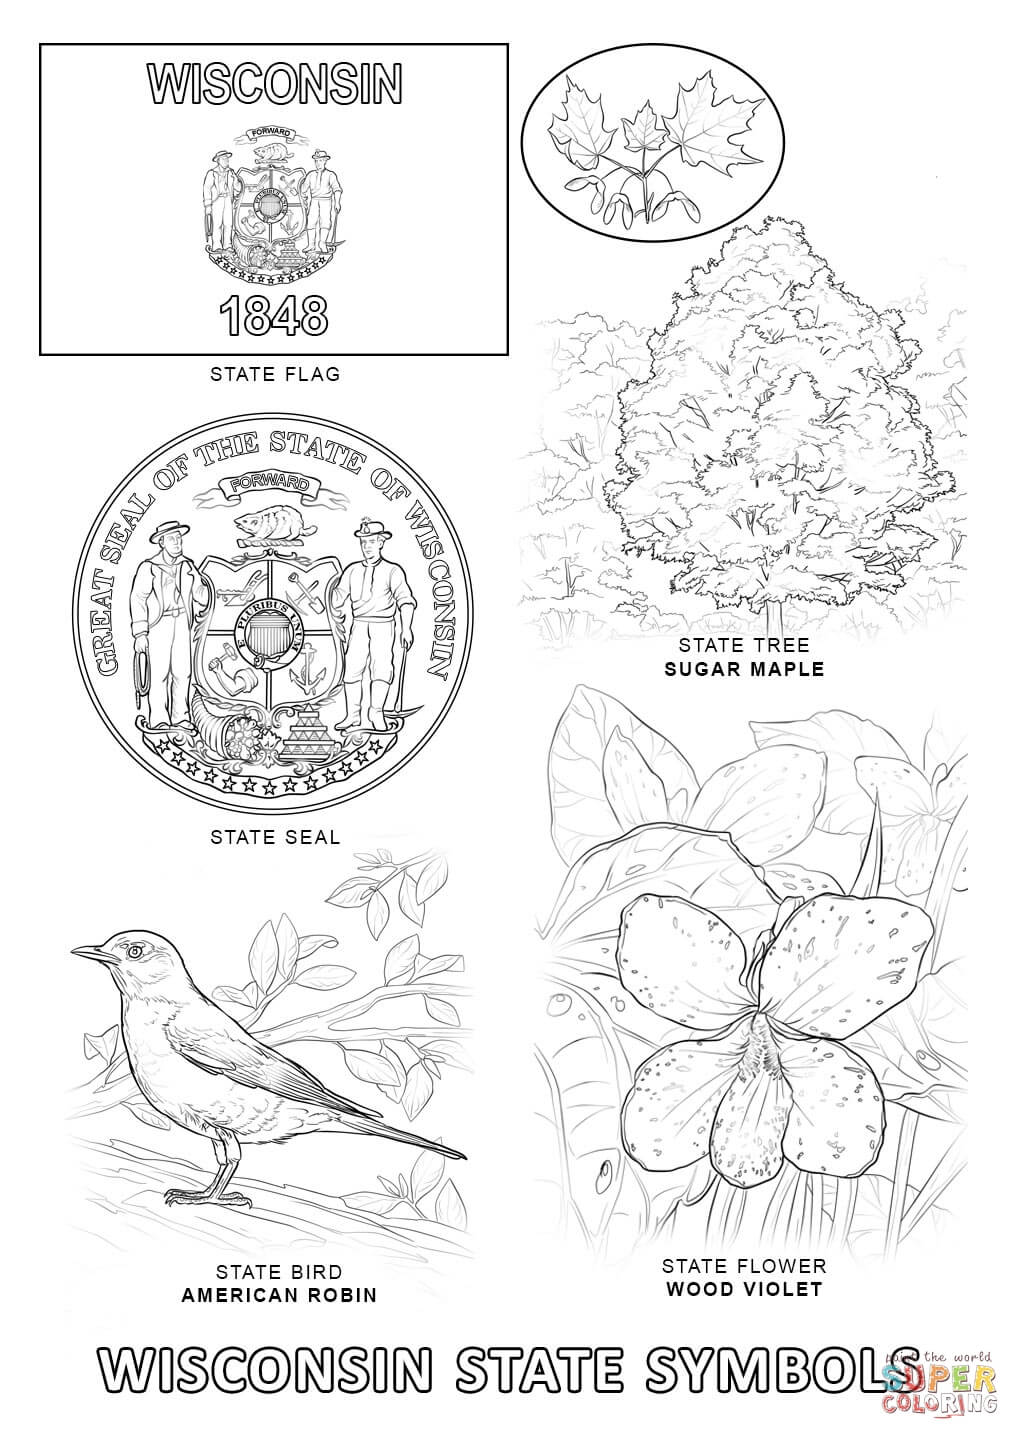 New York State Symbols Coloring Pages - High Quality Coloring Pages